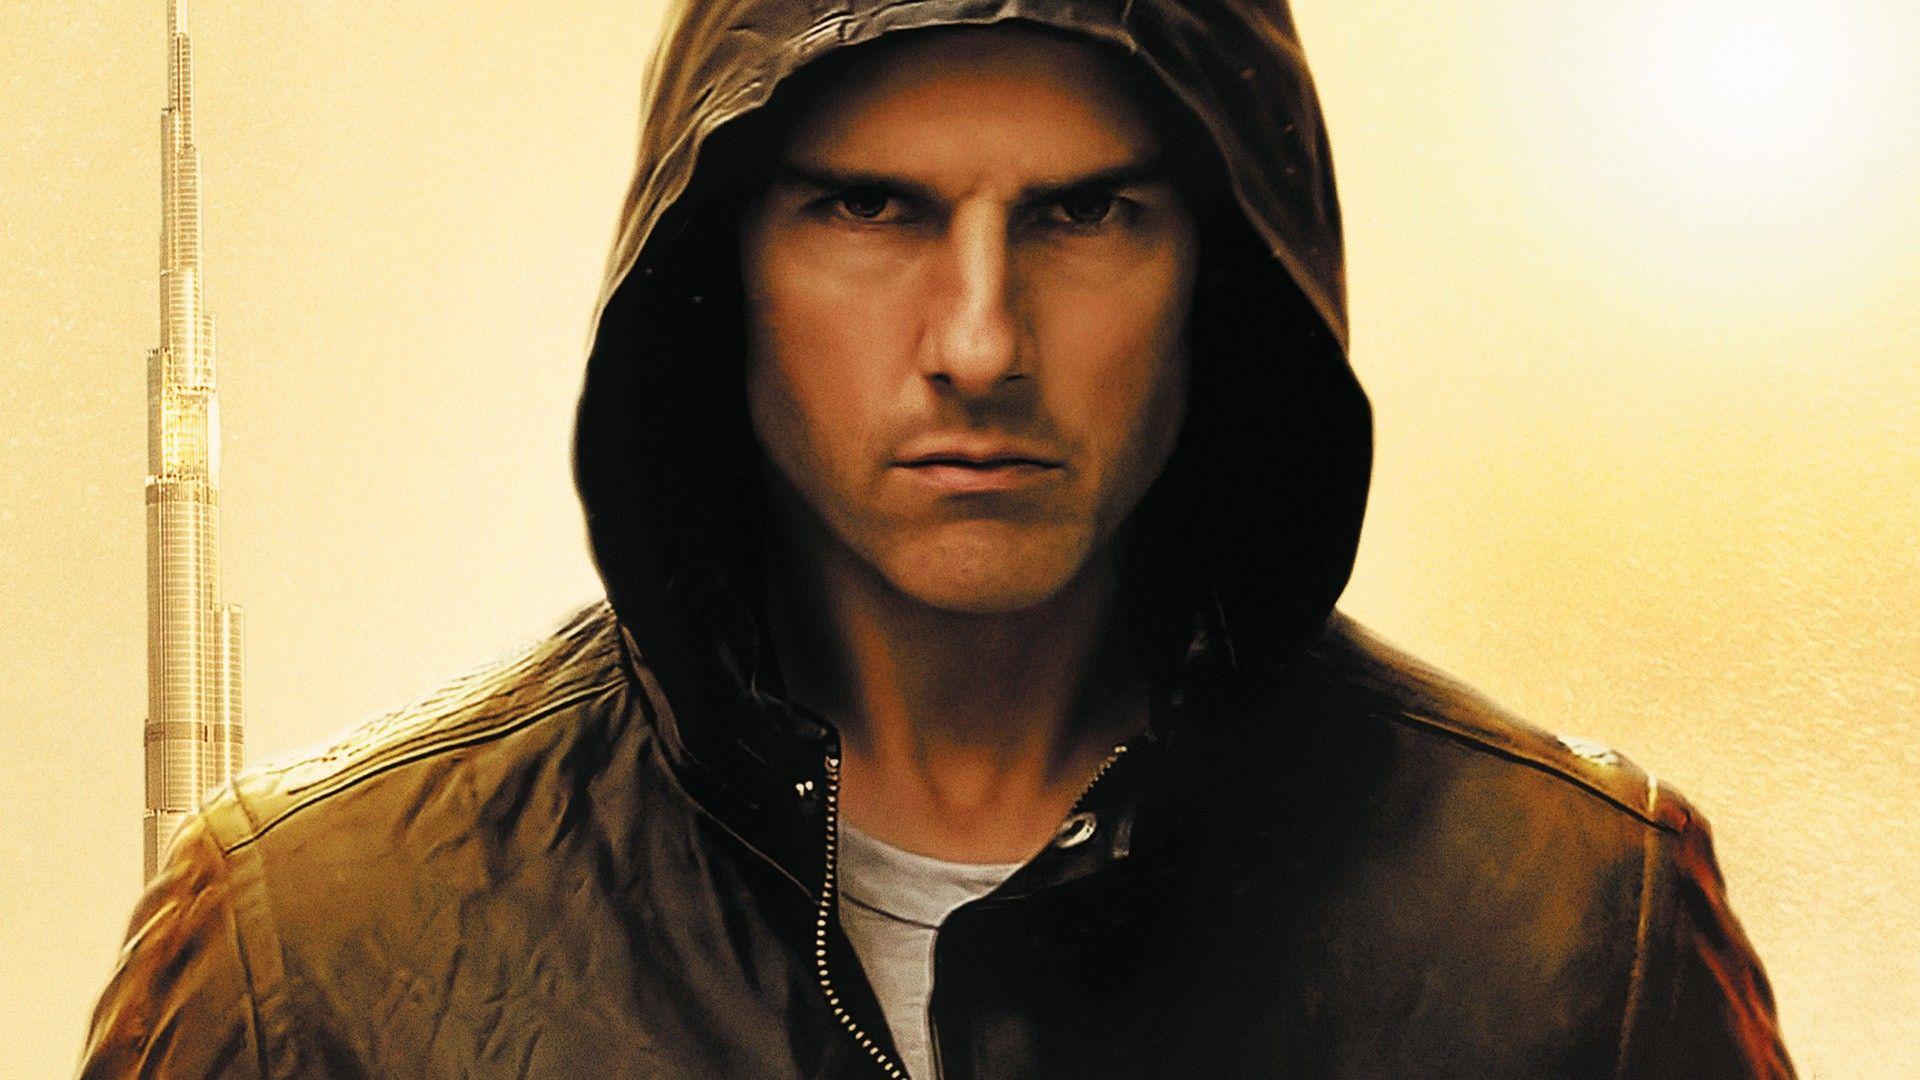 Tom cruise wallpapers Archives